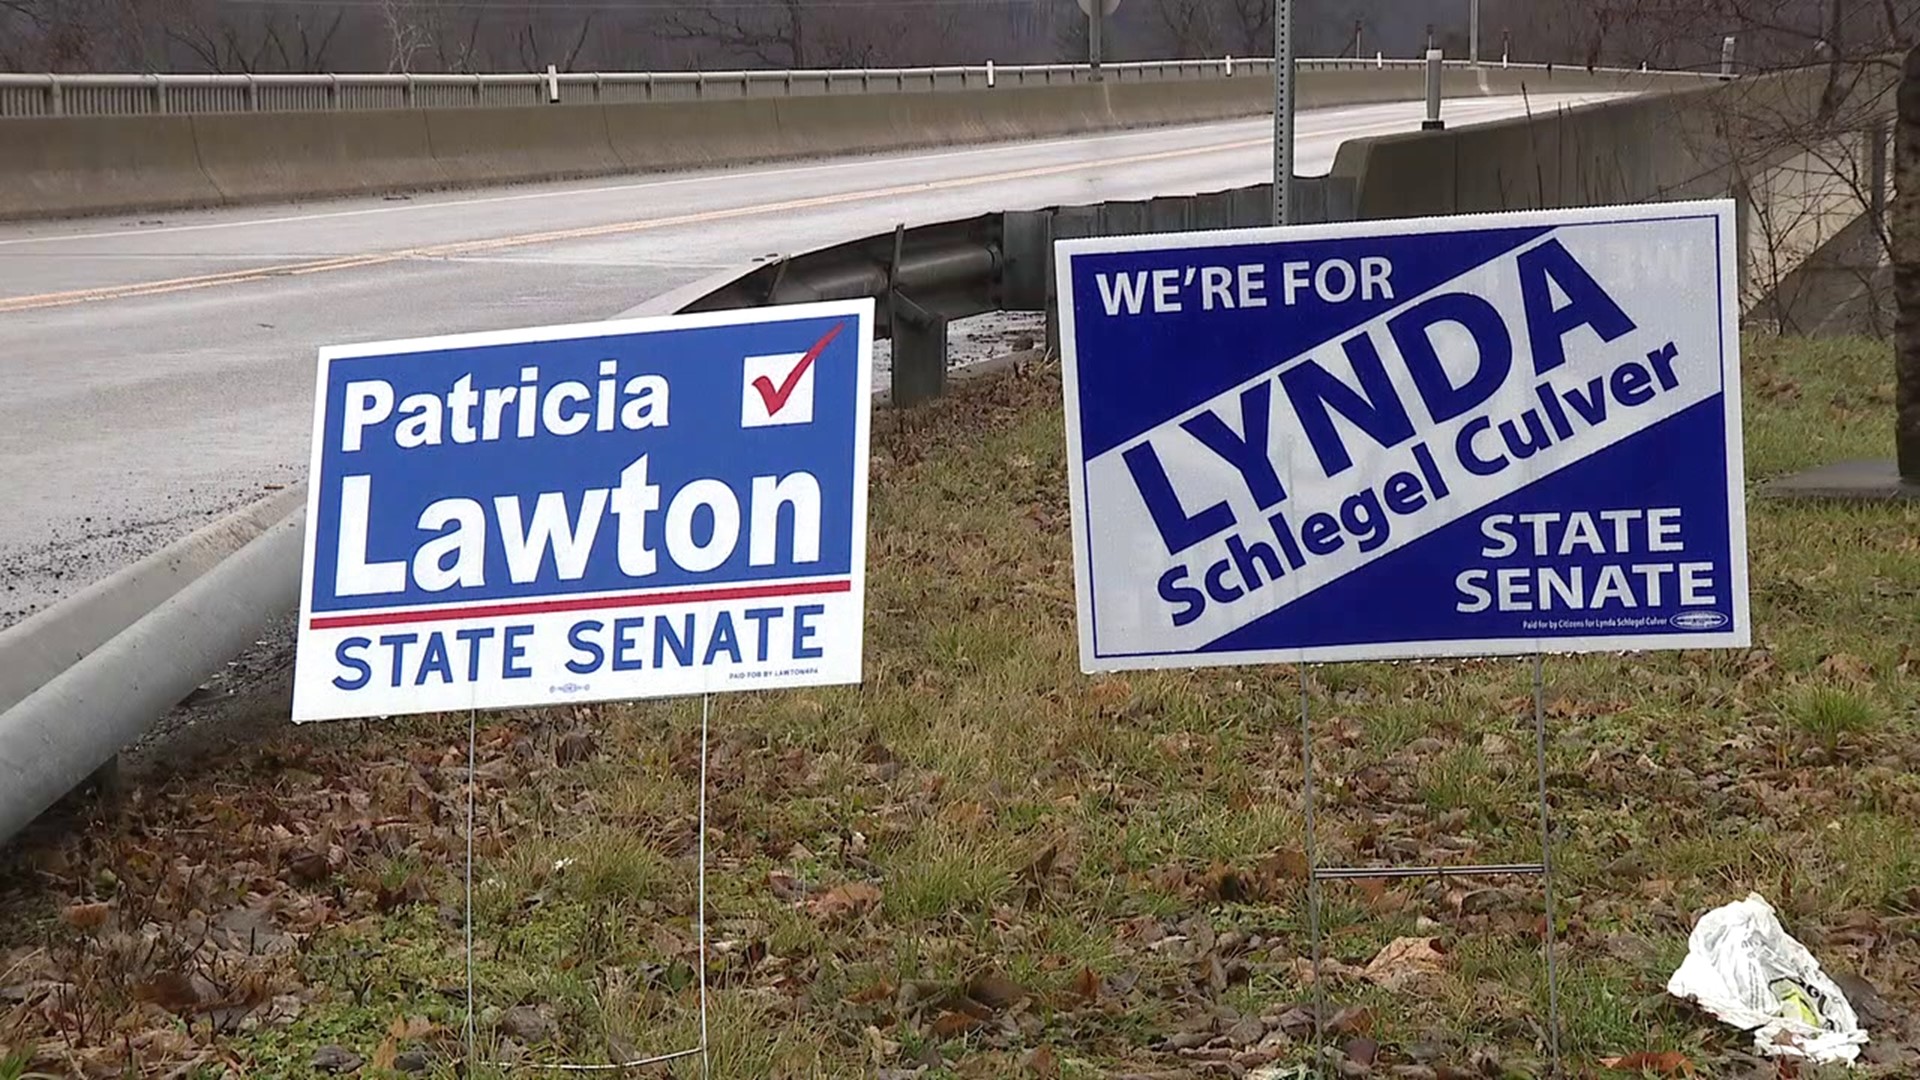 Voters came out to decide who will fill the vacancy in the state senate's 27th district which covers several counties across northeastern Pennsylvania.